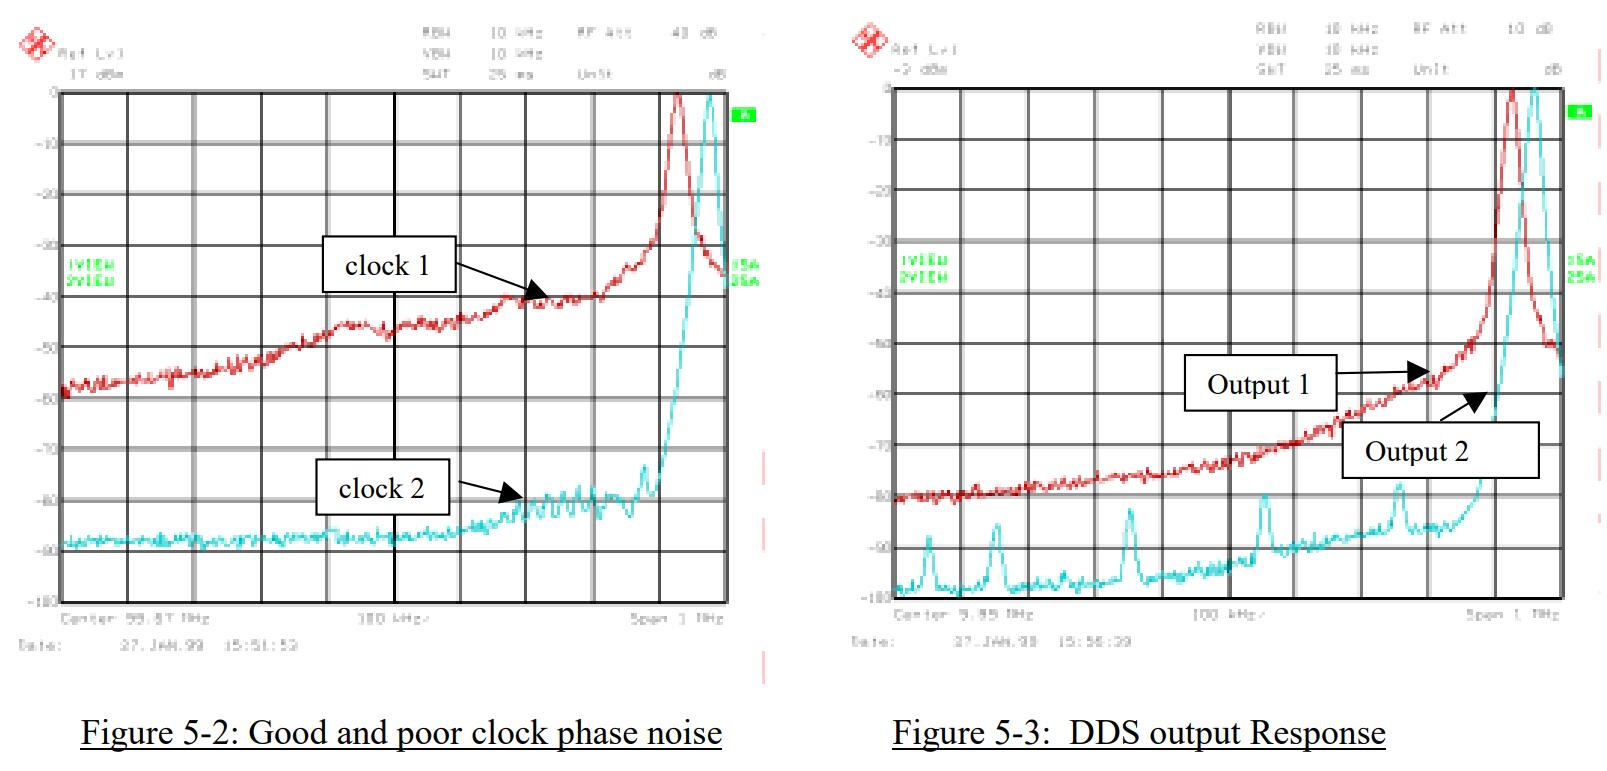 Good and poor clock phase noise & DDS output Response